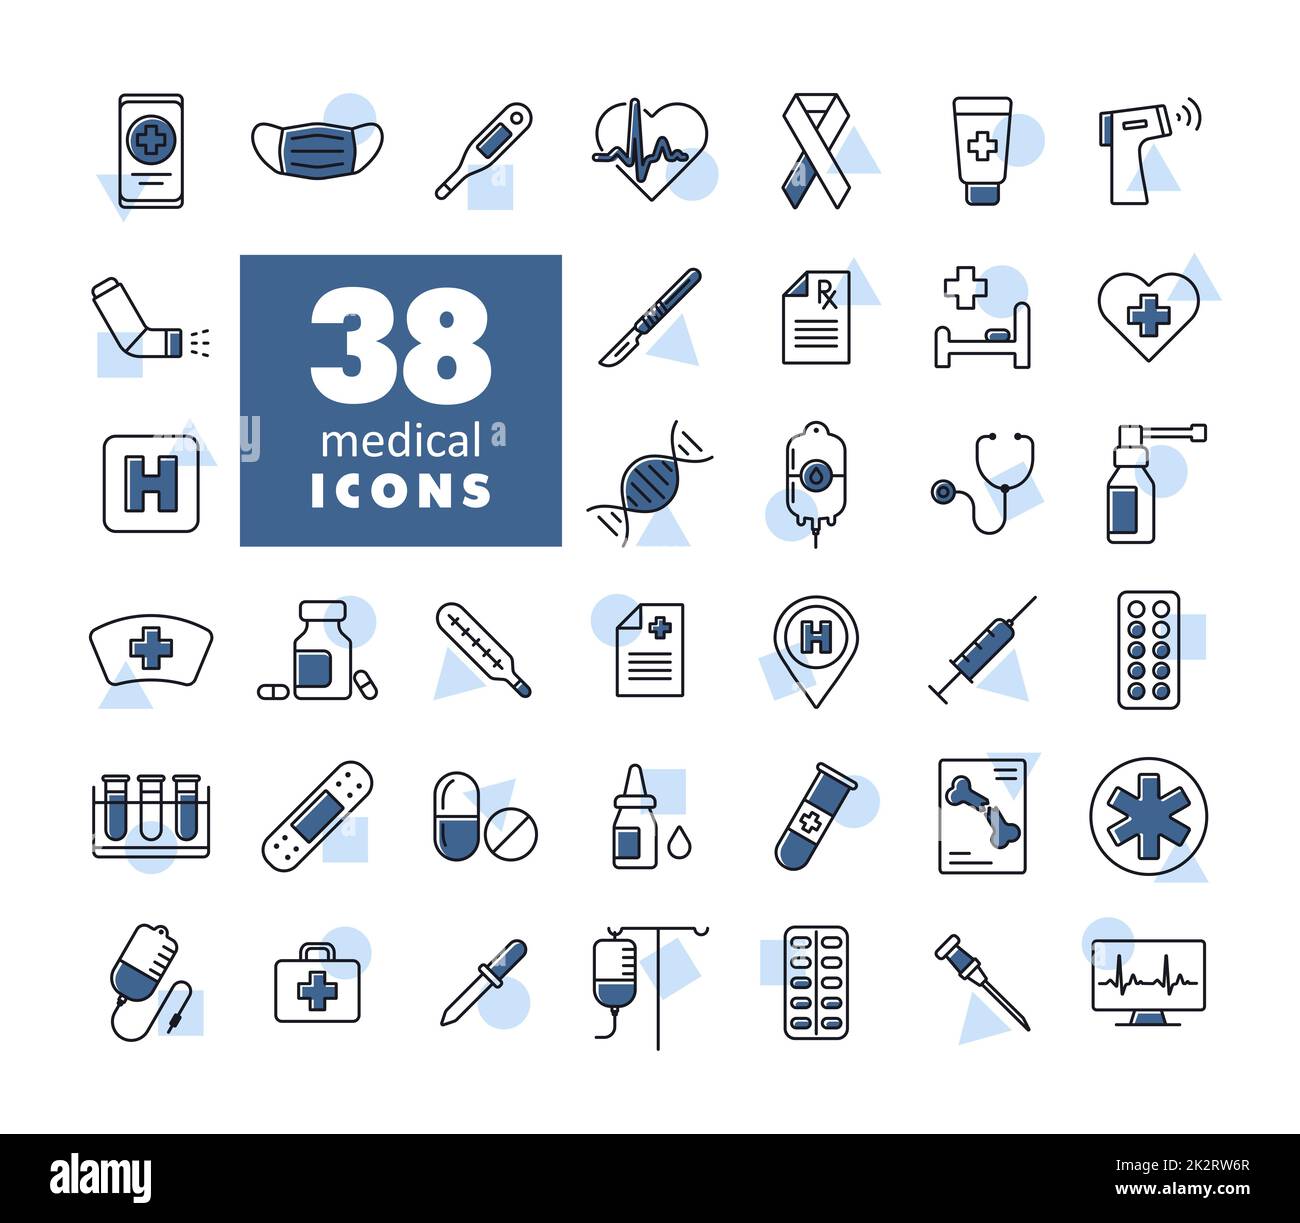 Medicine and healthcare, medical support icons set Stock Photo